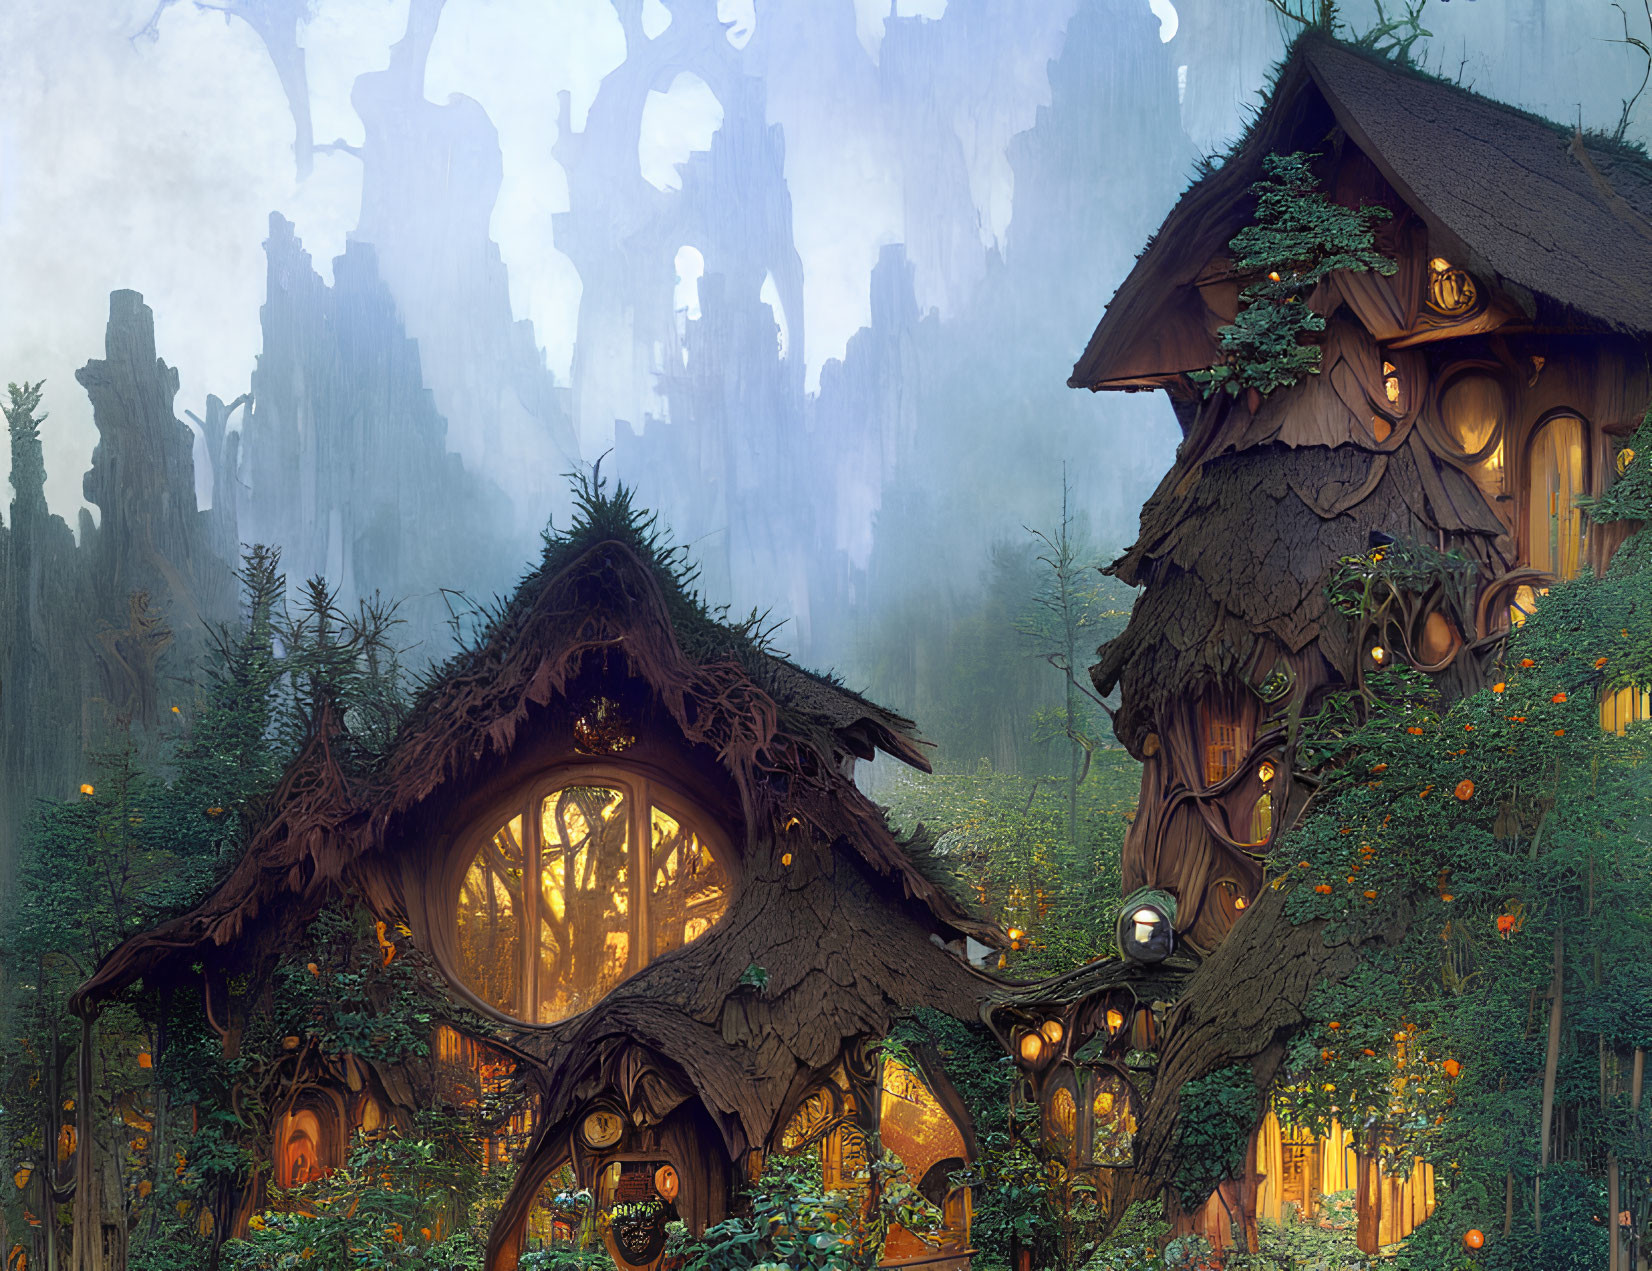 Enchanted Forest Treehouses with Glowing Windows